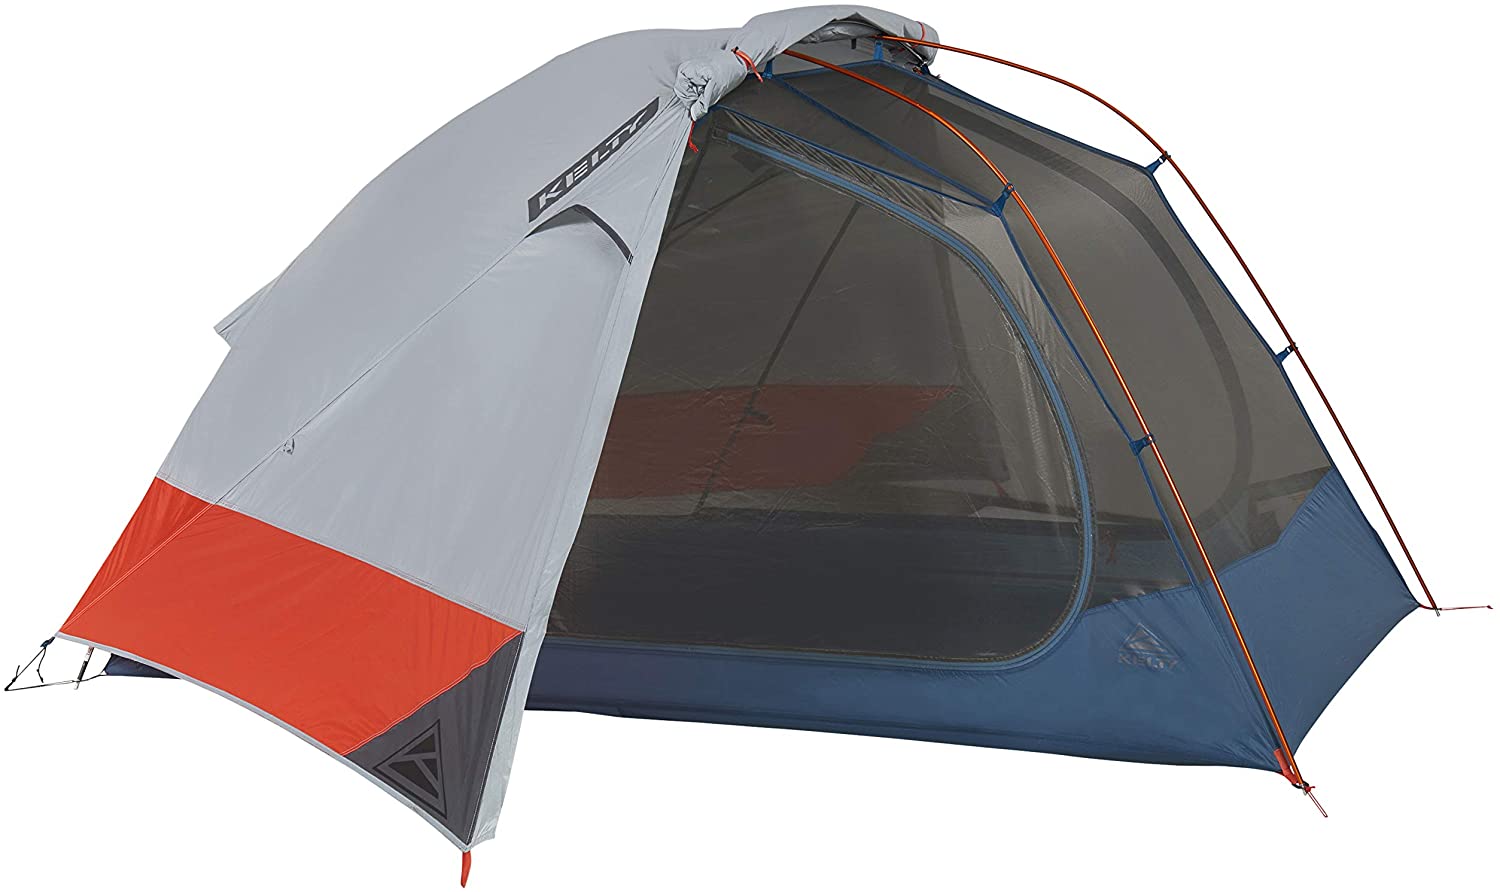 7 Best Kelty Tents Reviews